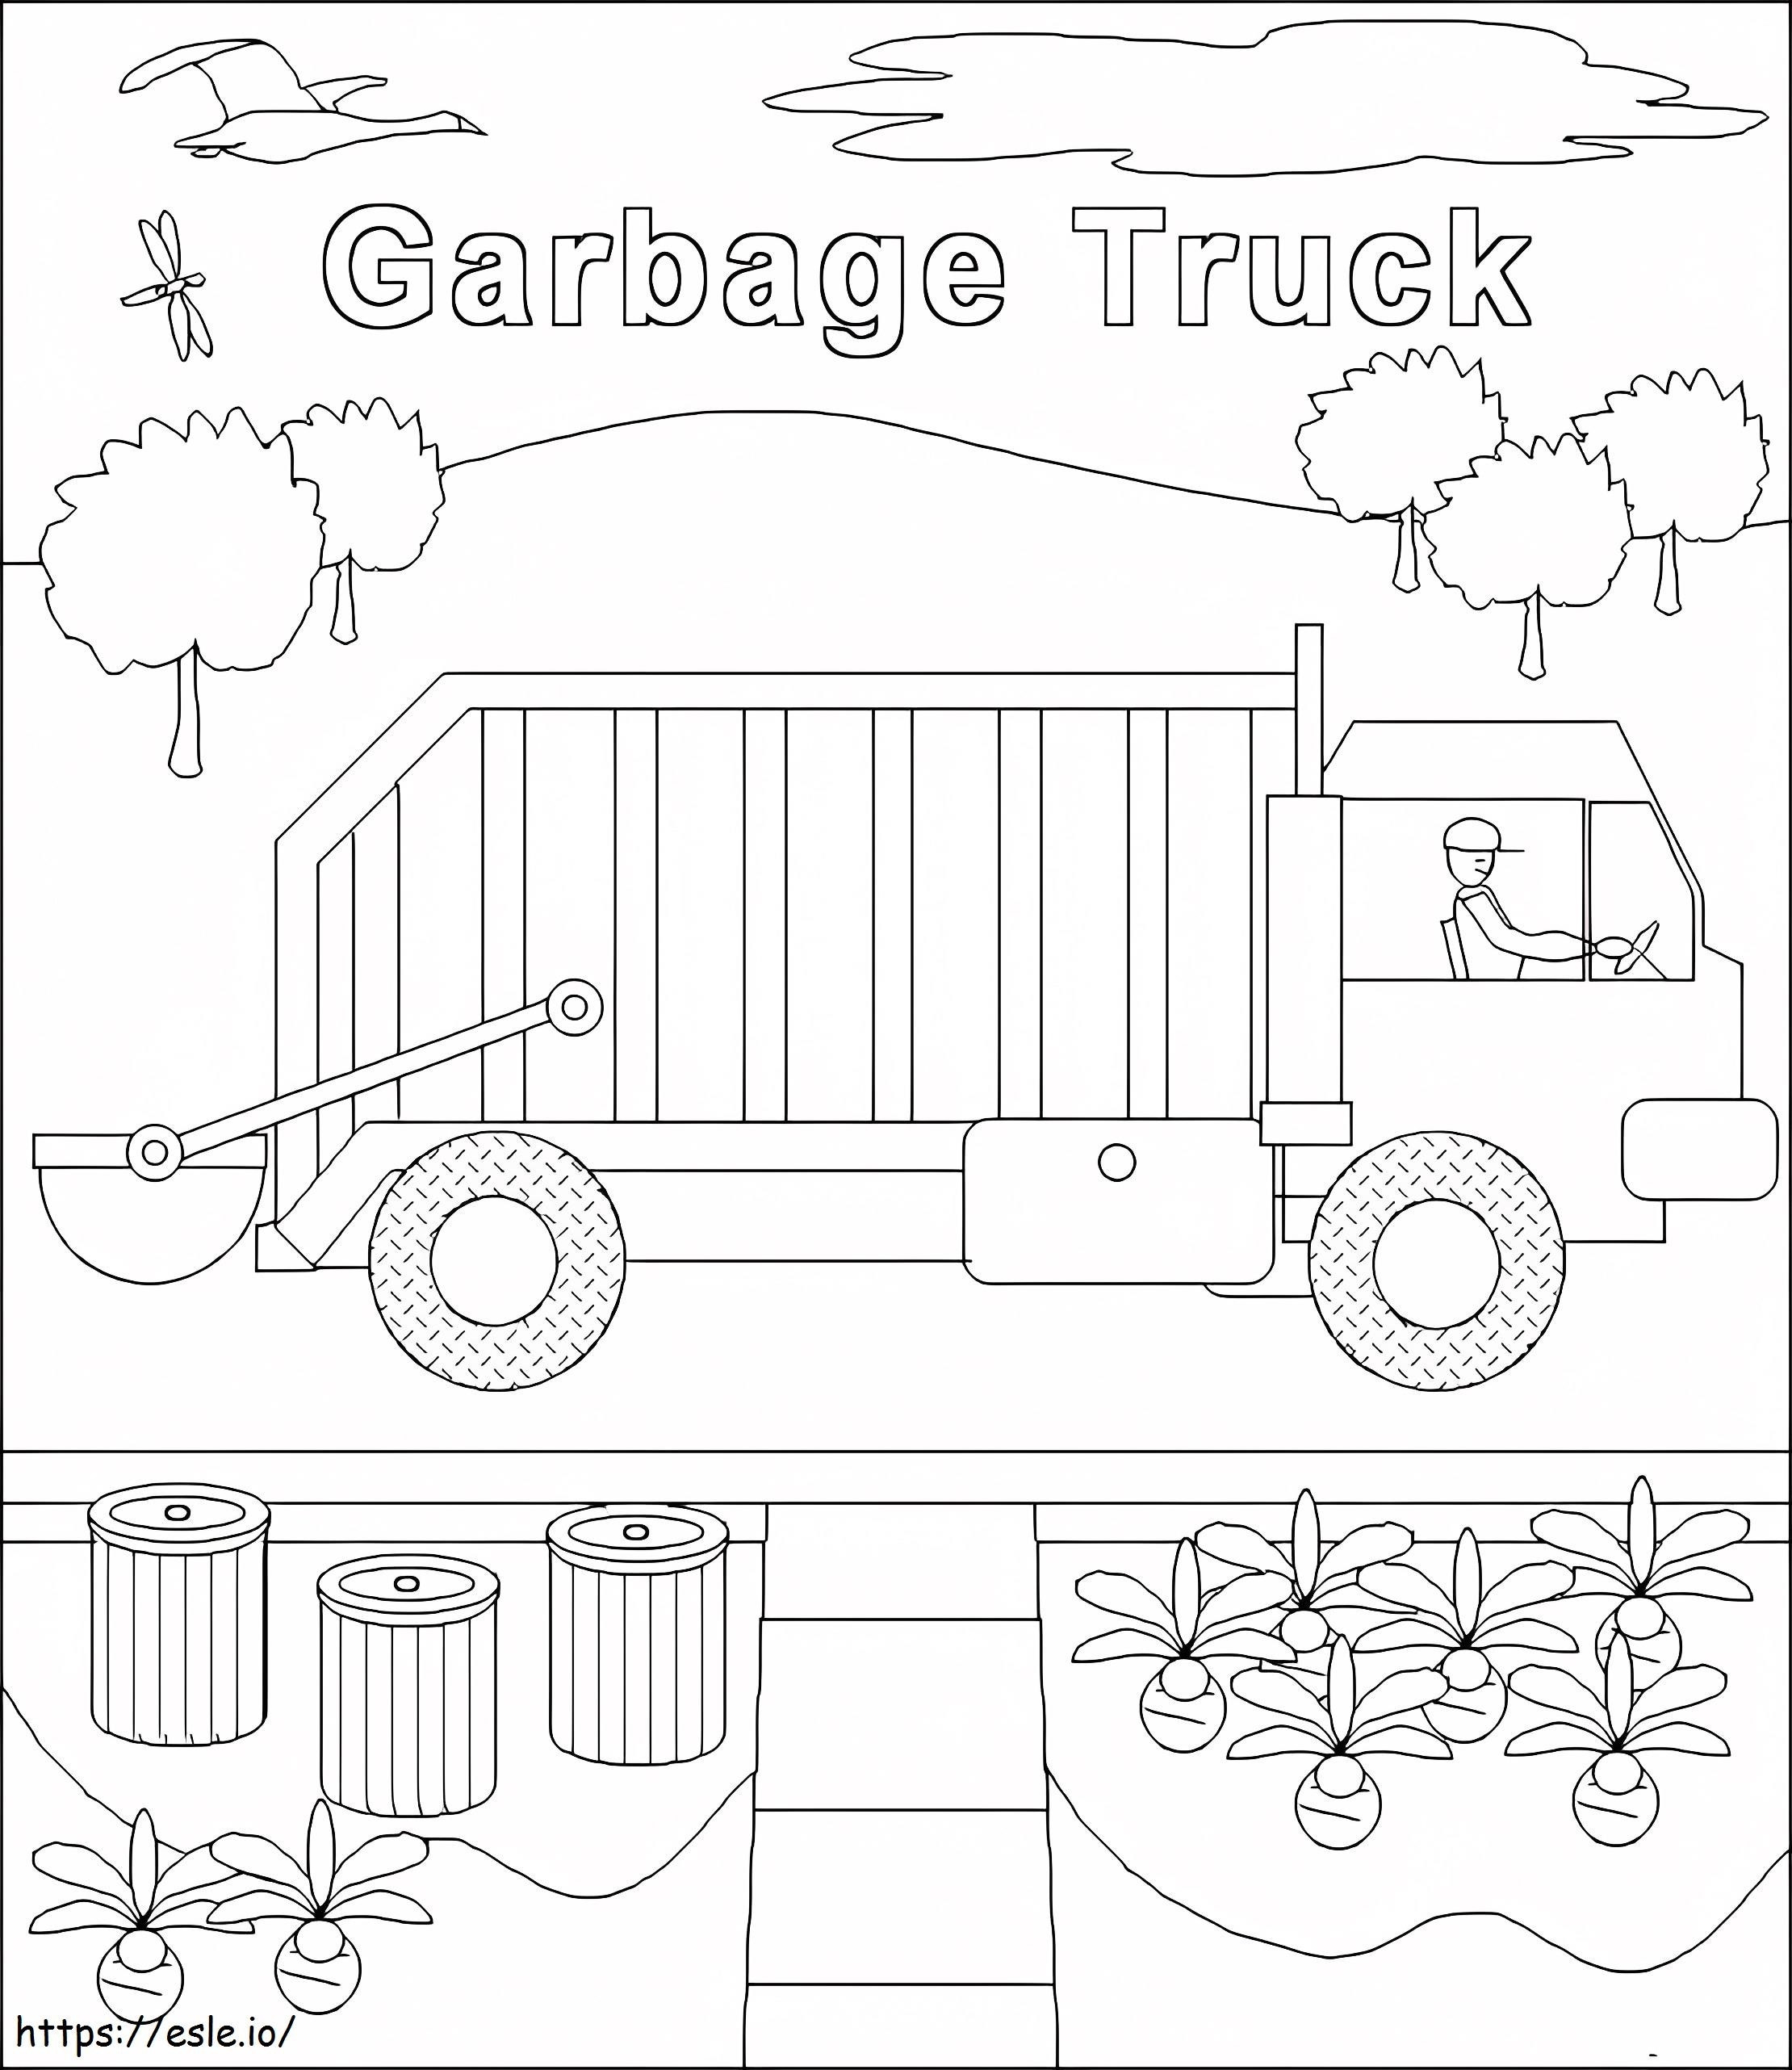 Cartoon Garbage Truck coloring page